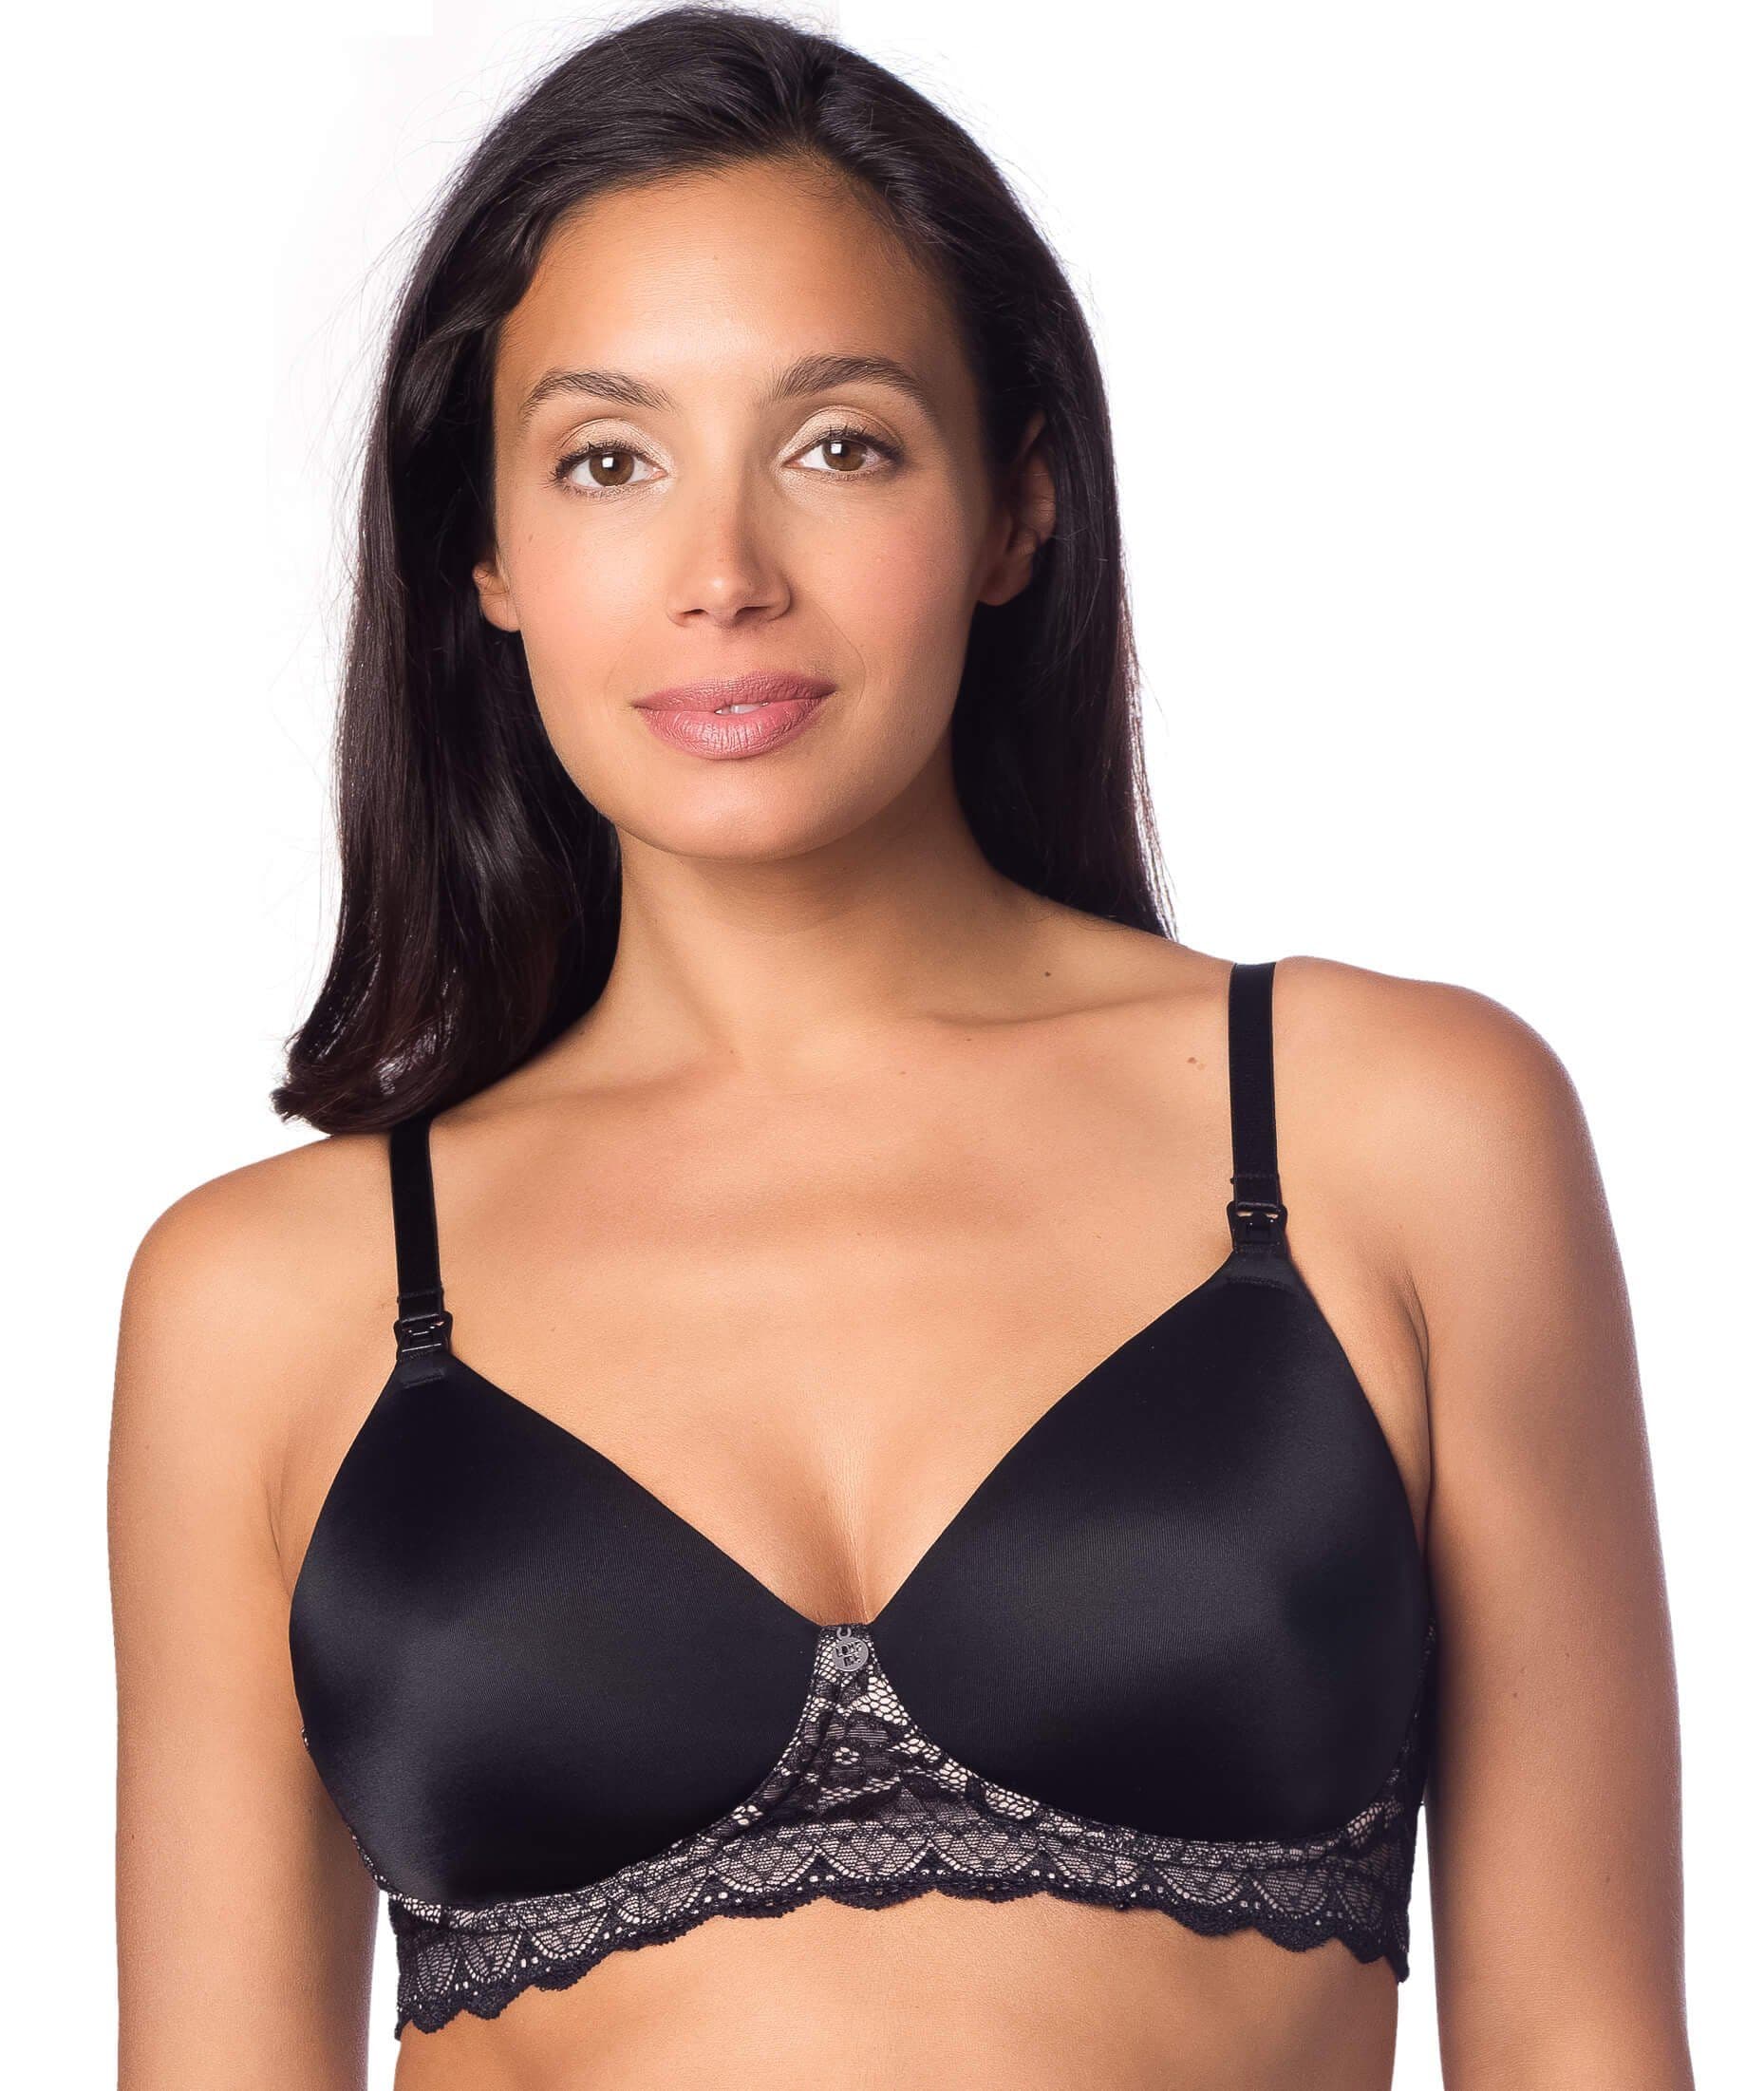 Temple Luxe by Berlei Smooth Level 2 Push Up Bra - Black - Curvy